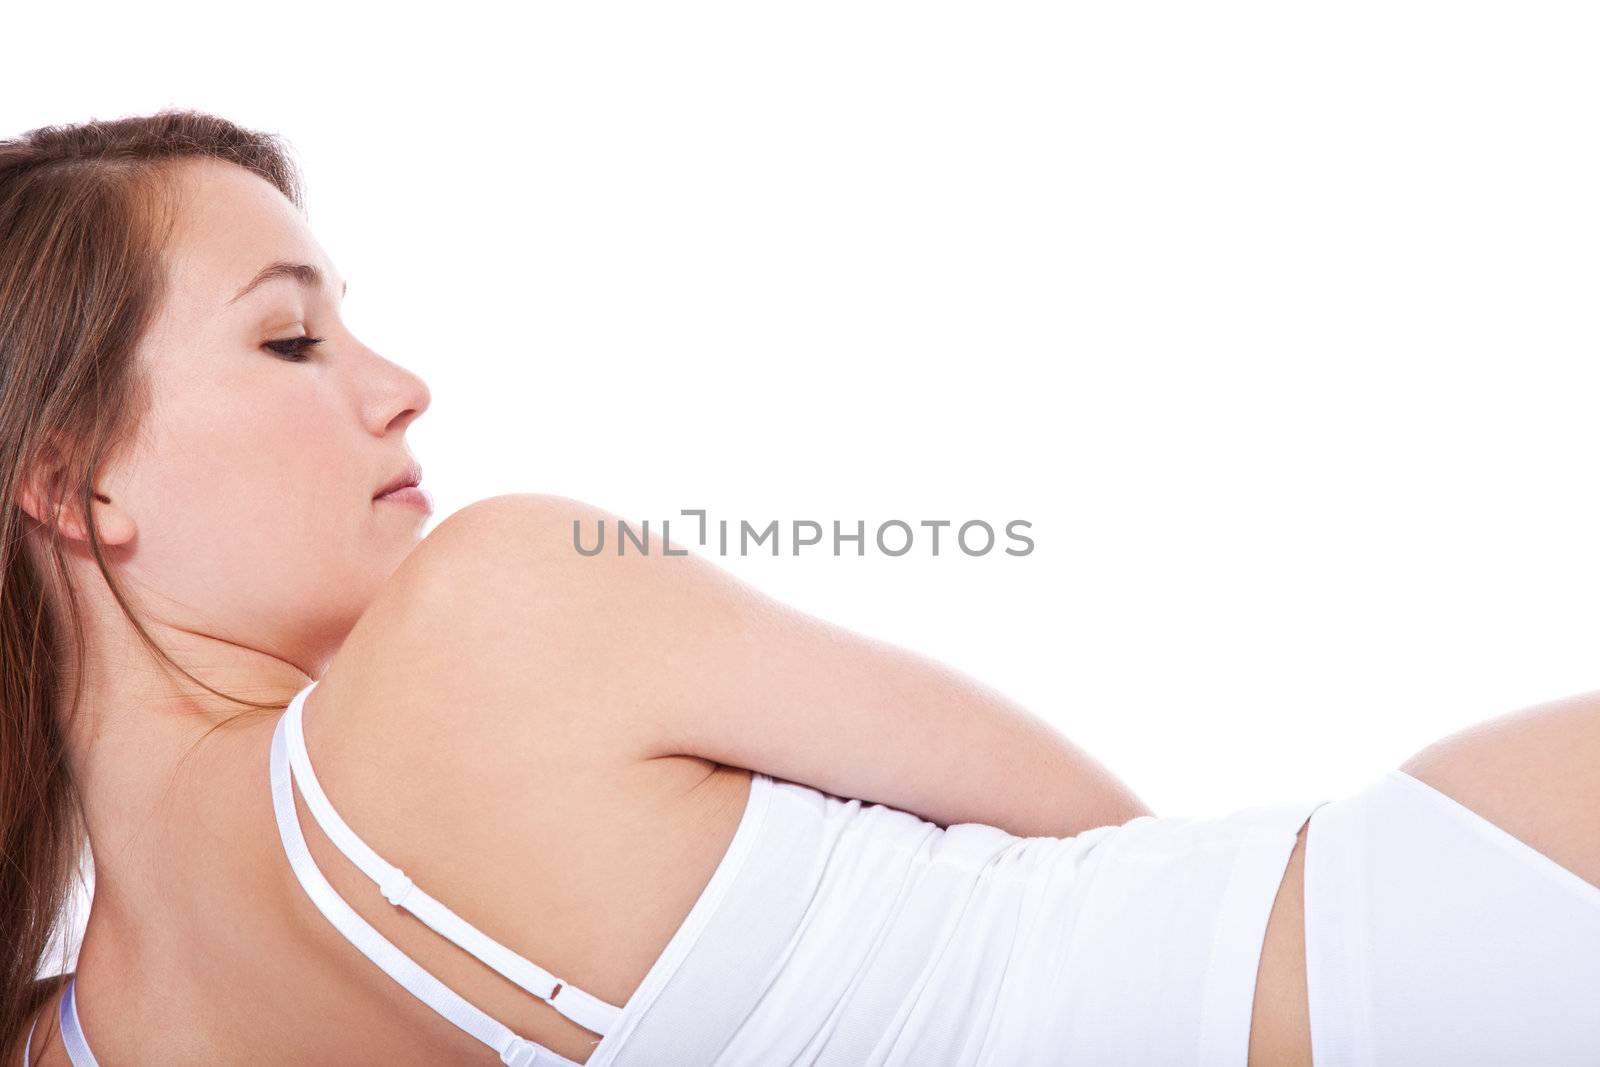 Attractive young woman in underwear. All on white background.